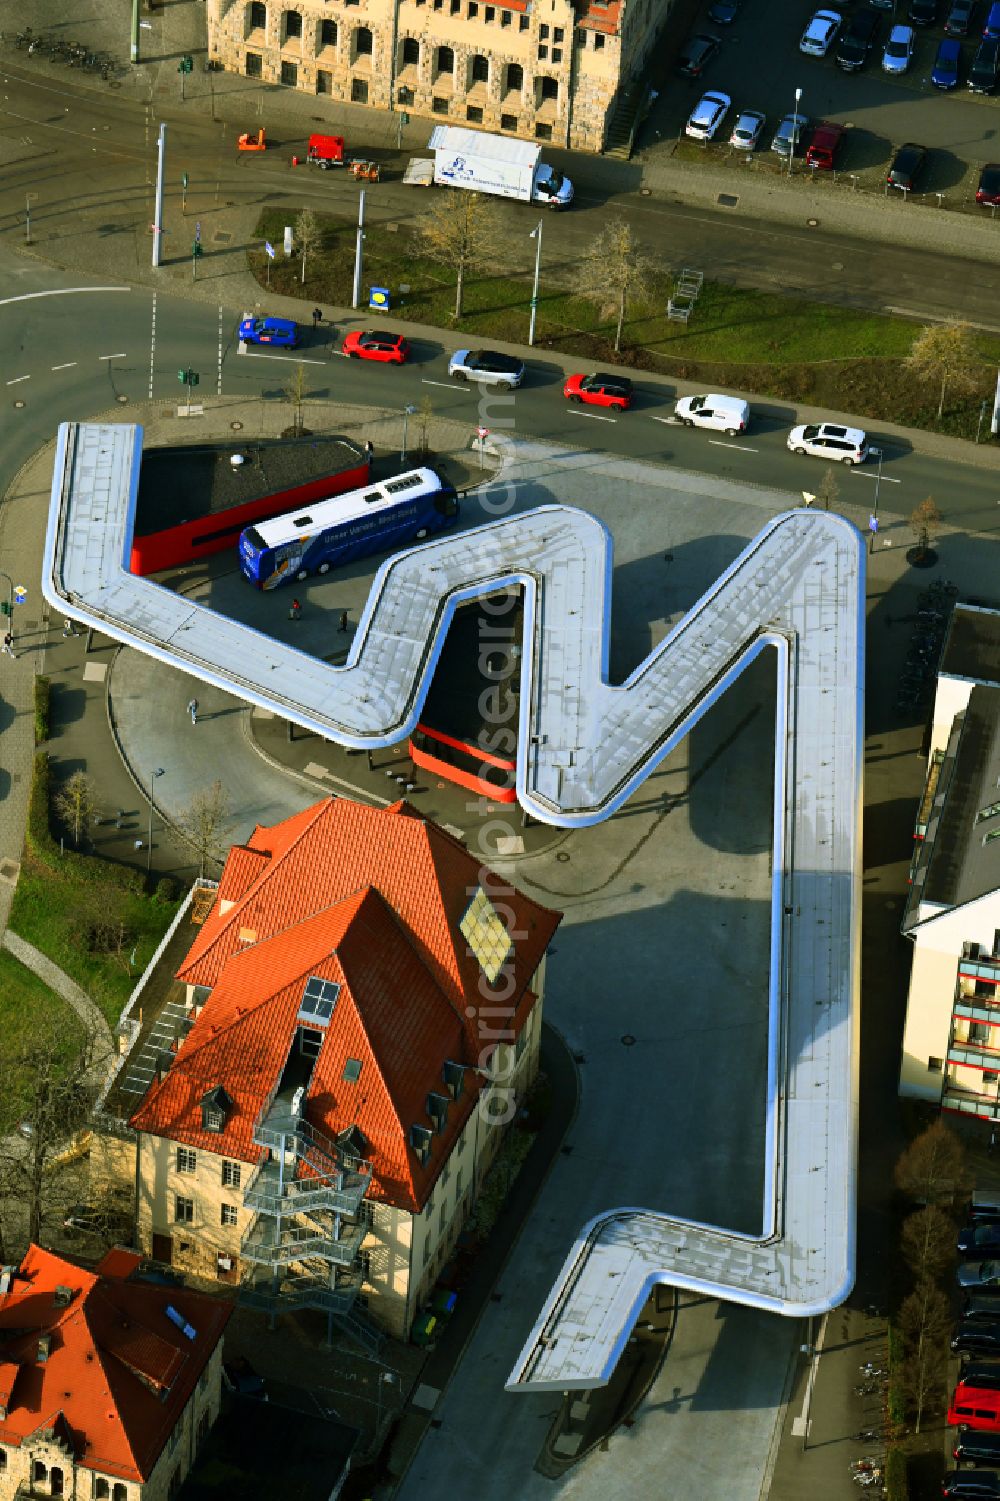 Aerial image Jena - Central Bus Station for Public Transportation on street Grietgasse - Knebelstrasse in Jena in the state Thuringia, Germany